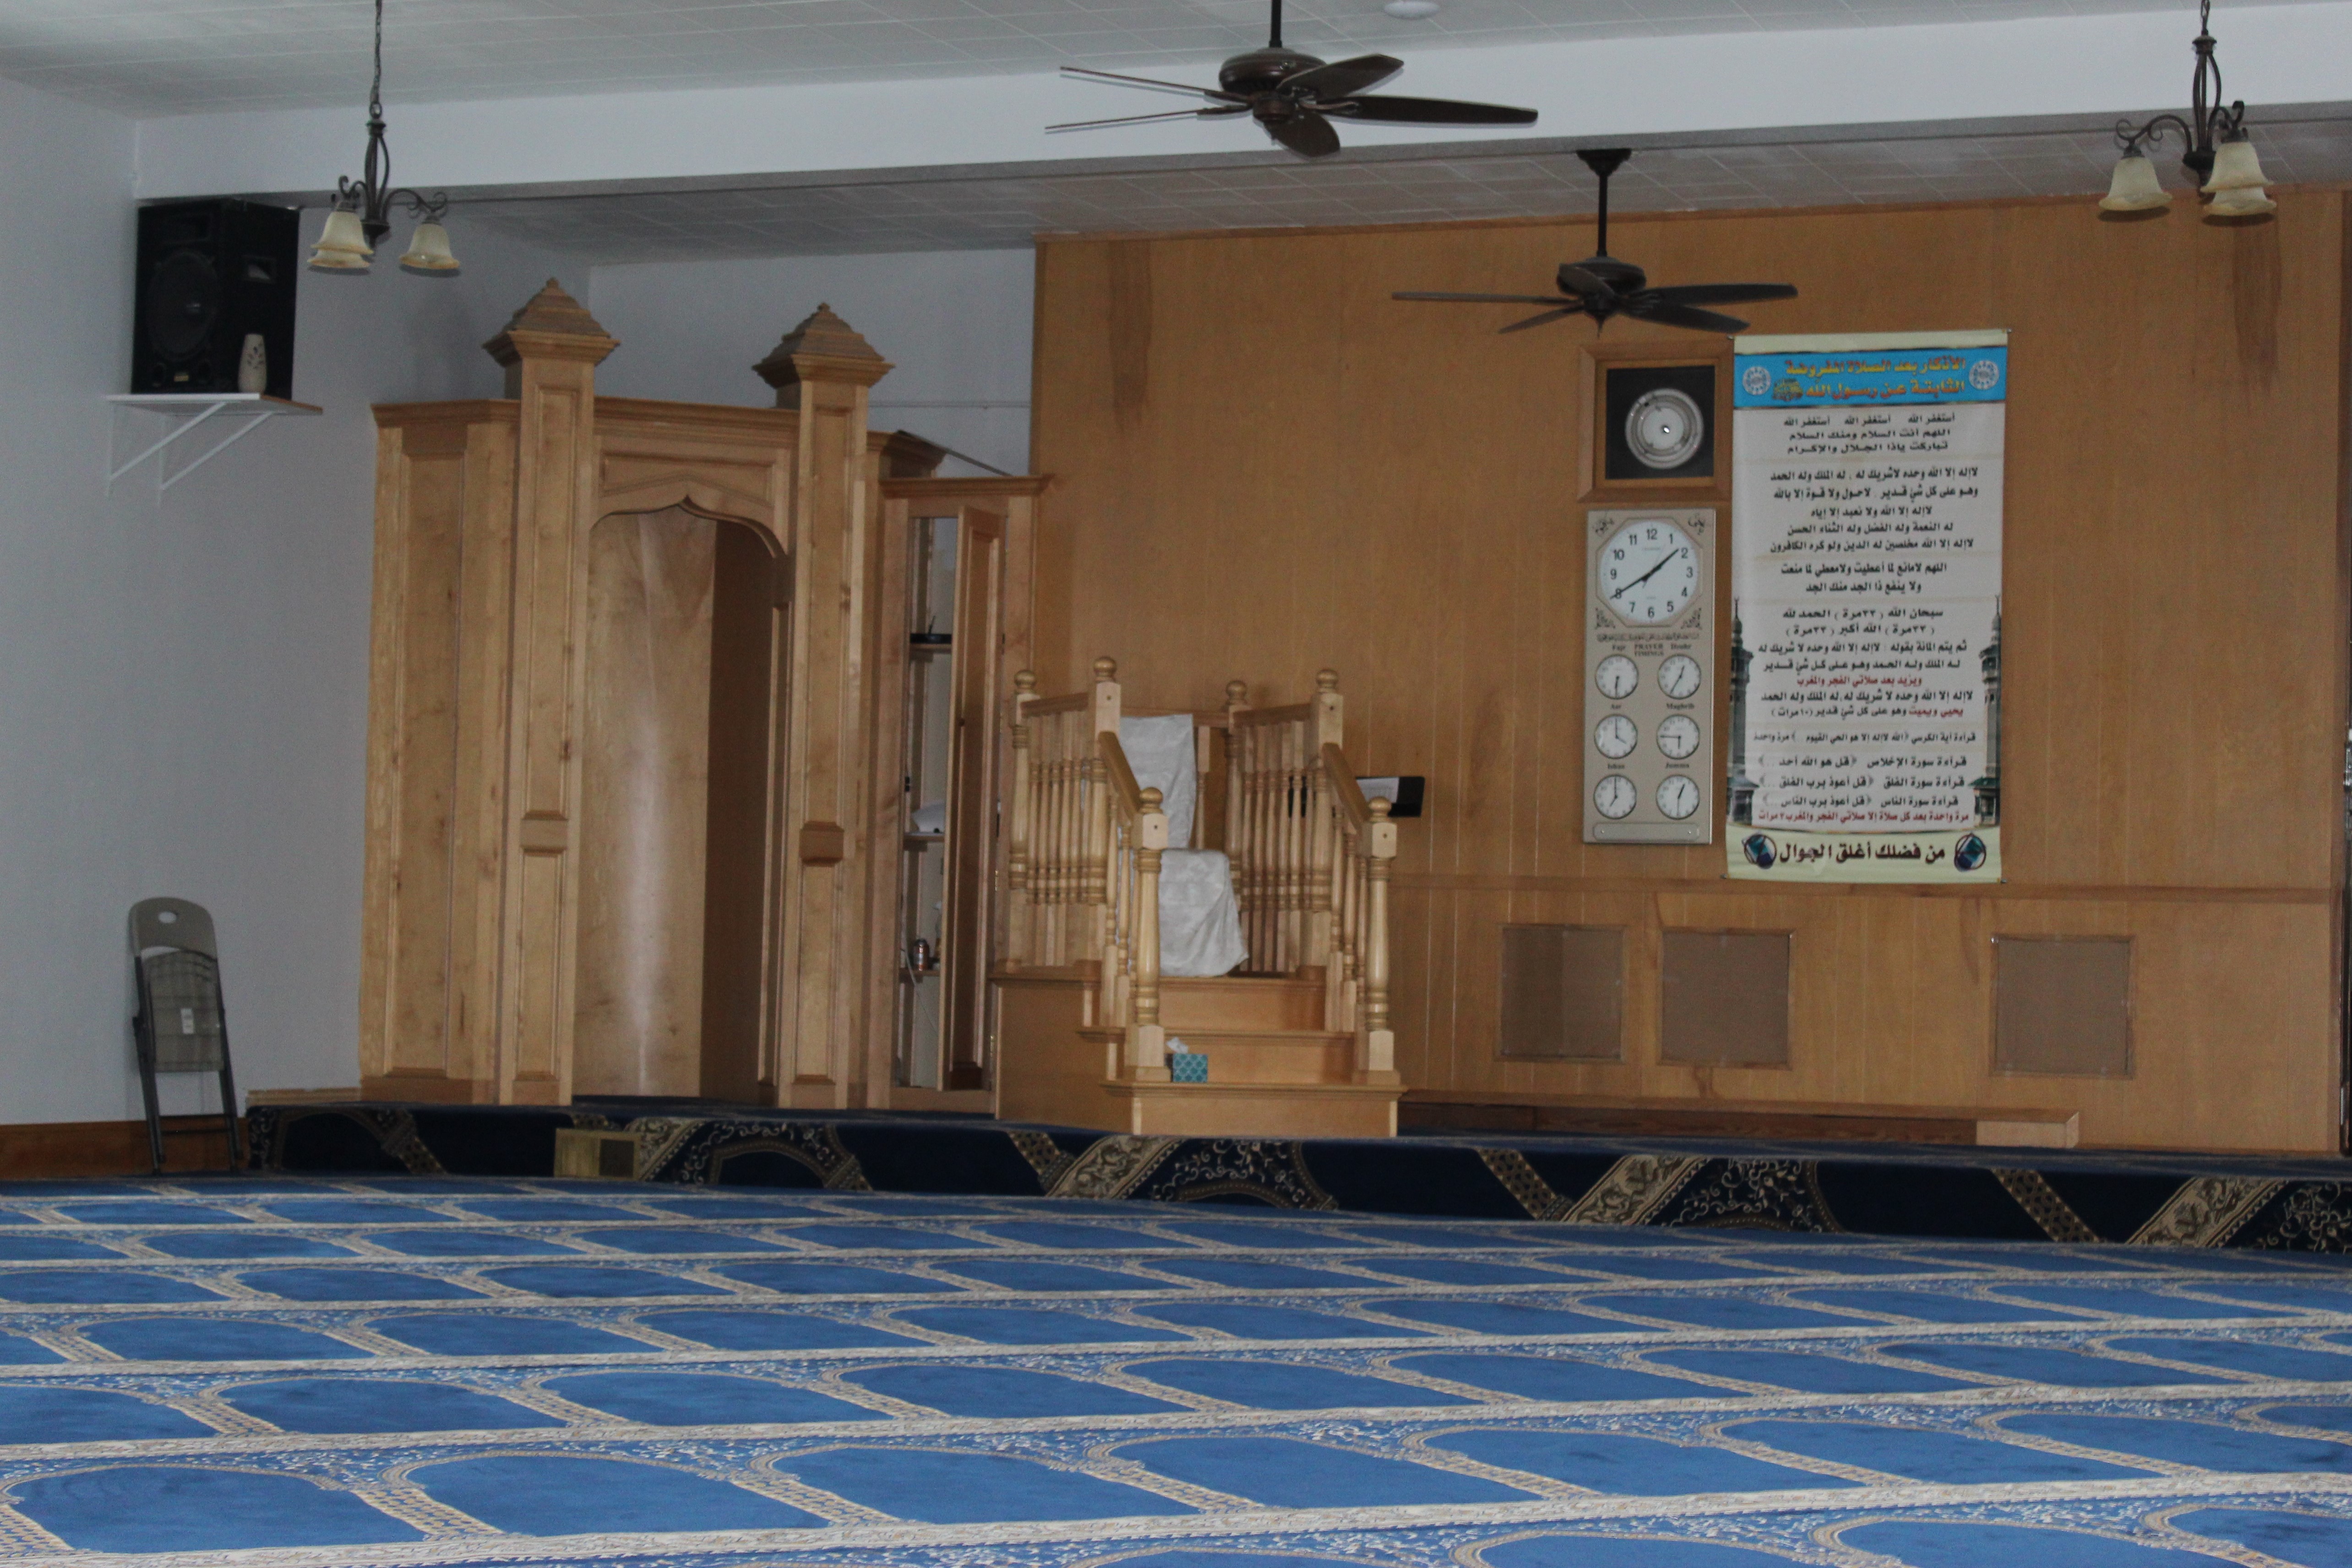 Image of Mosque in Des Moines, Iowa